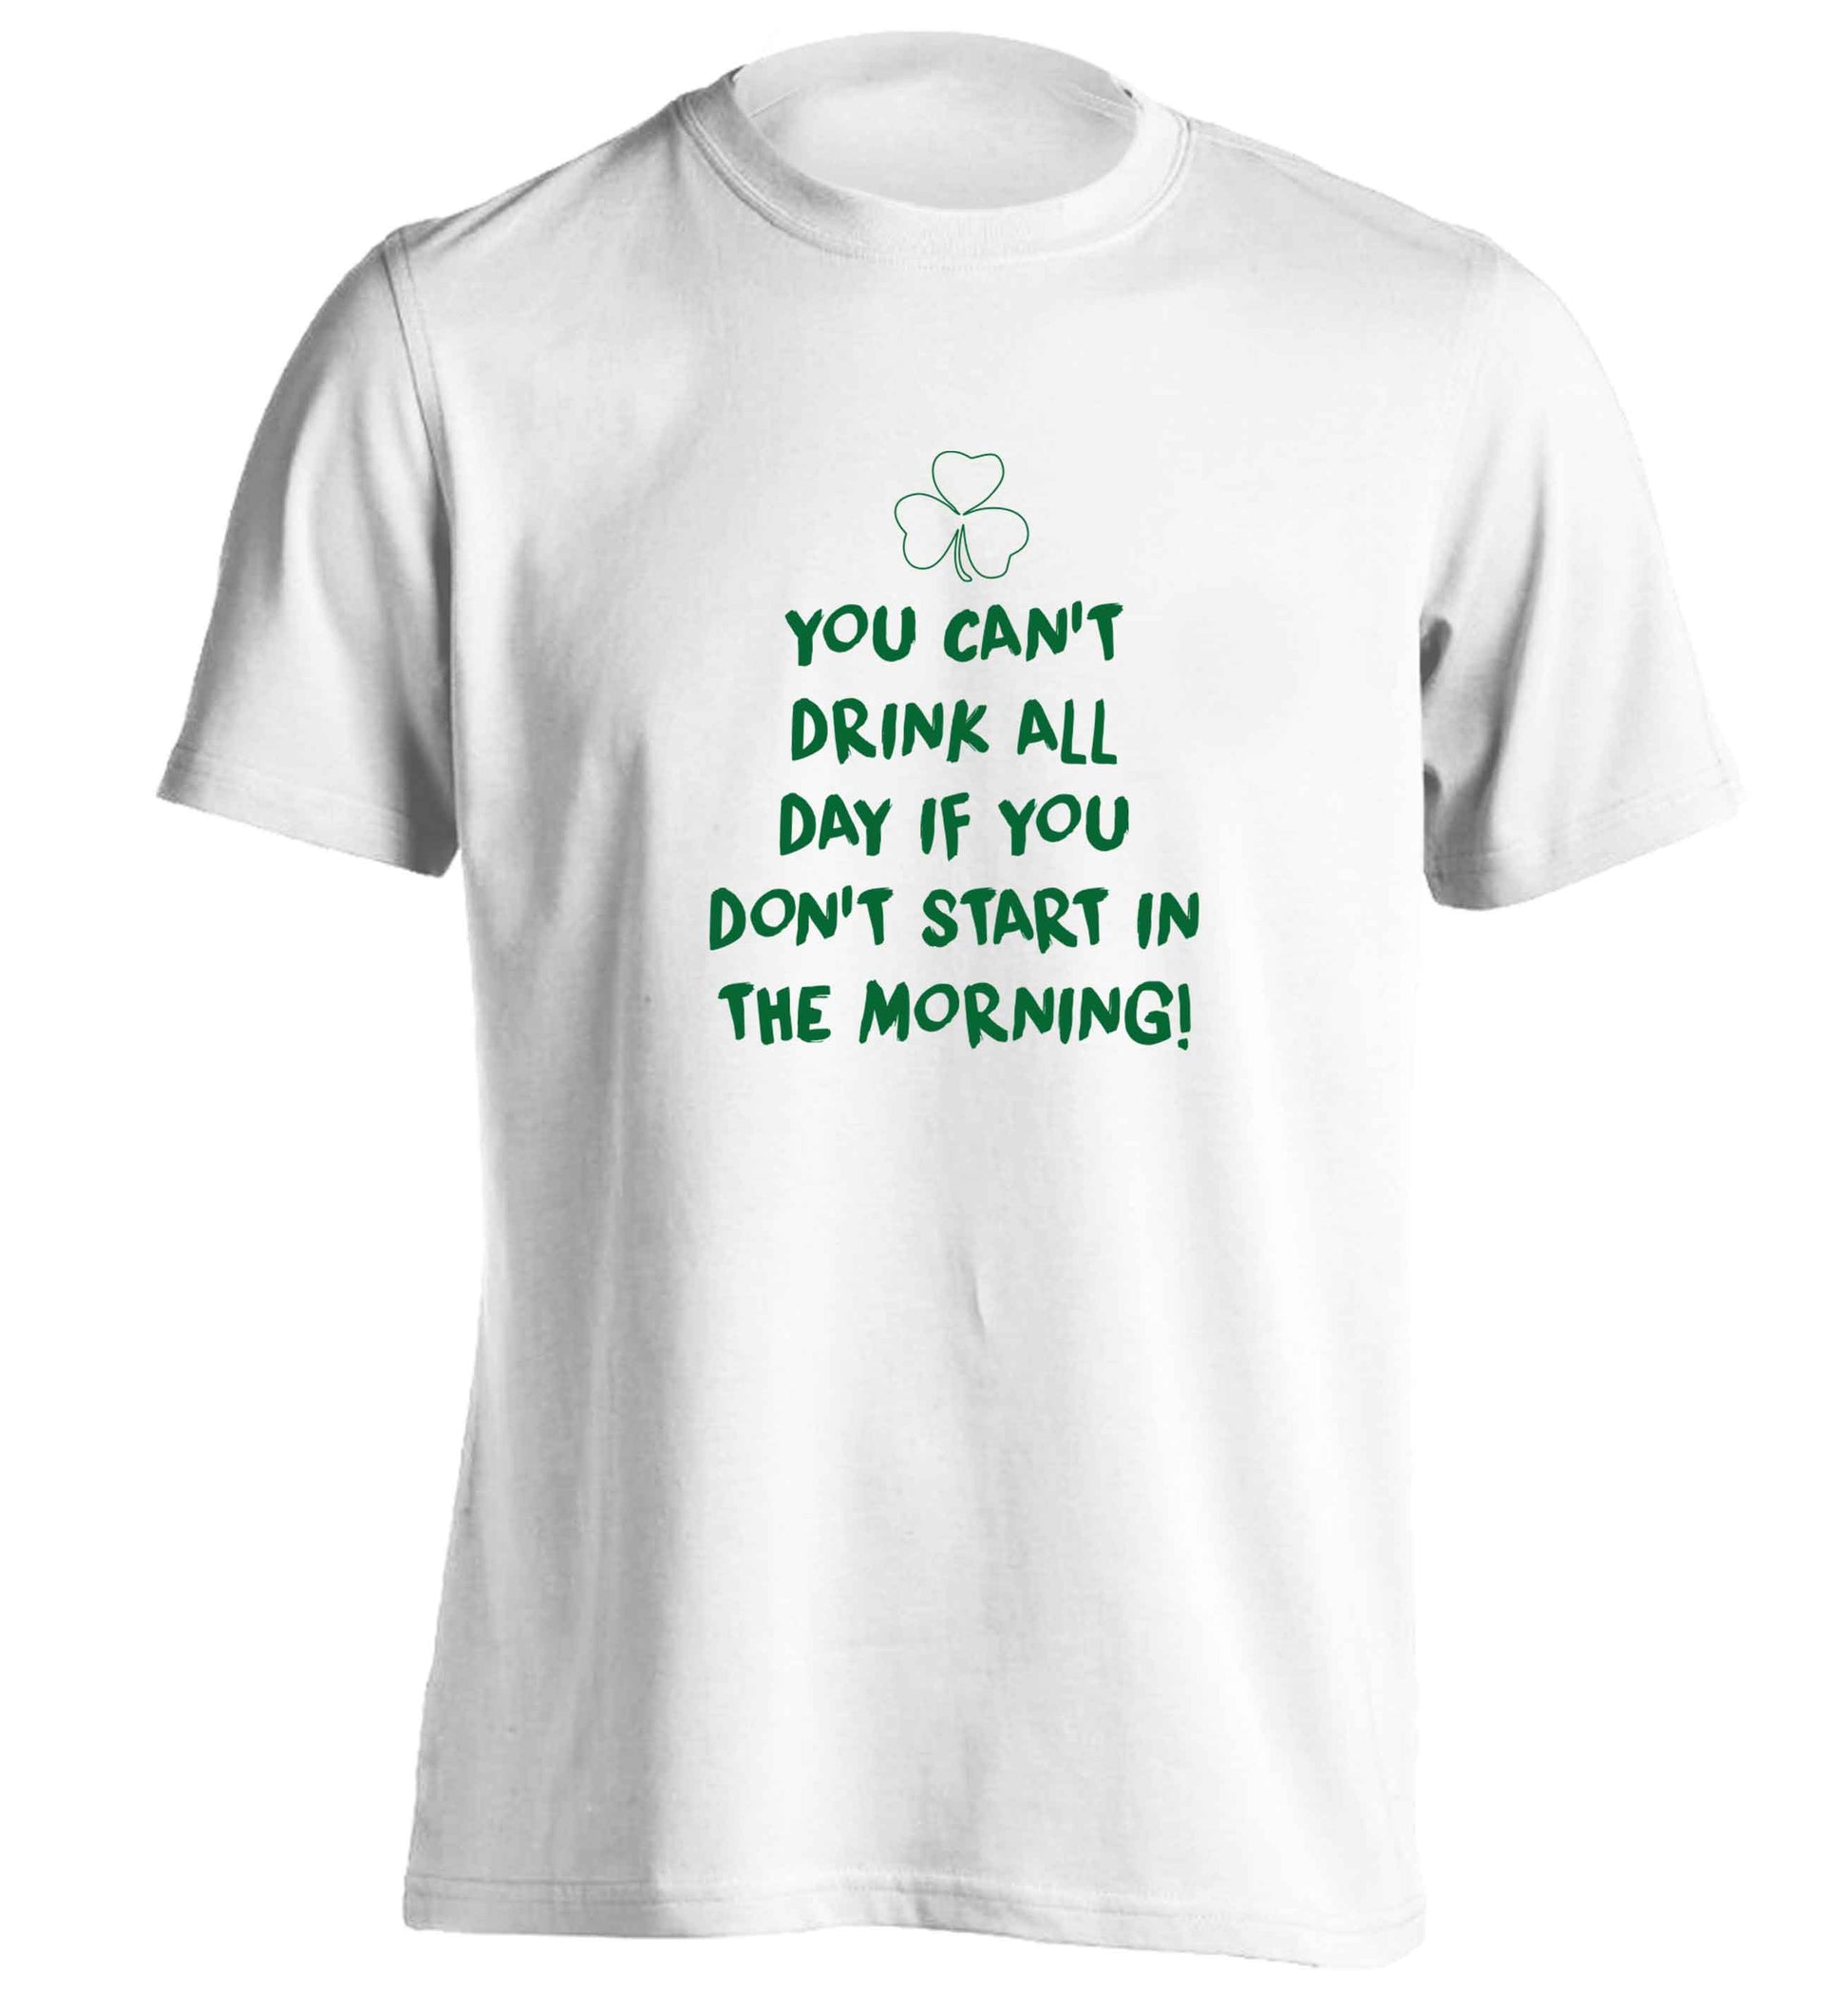 You can't drink all day if you don't start in the morning adults unisex white Tshirt 2XL